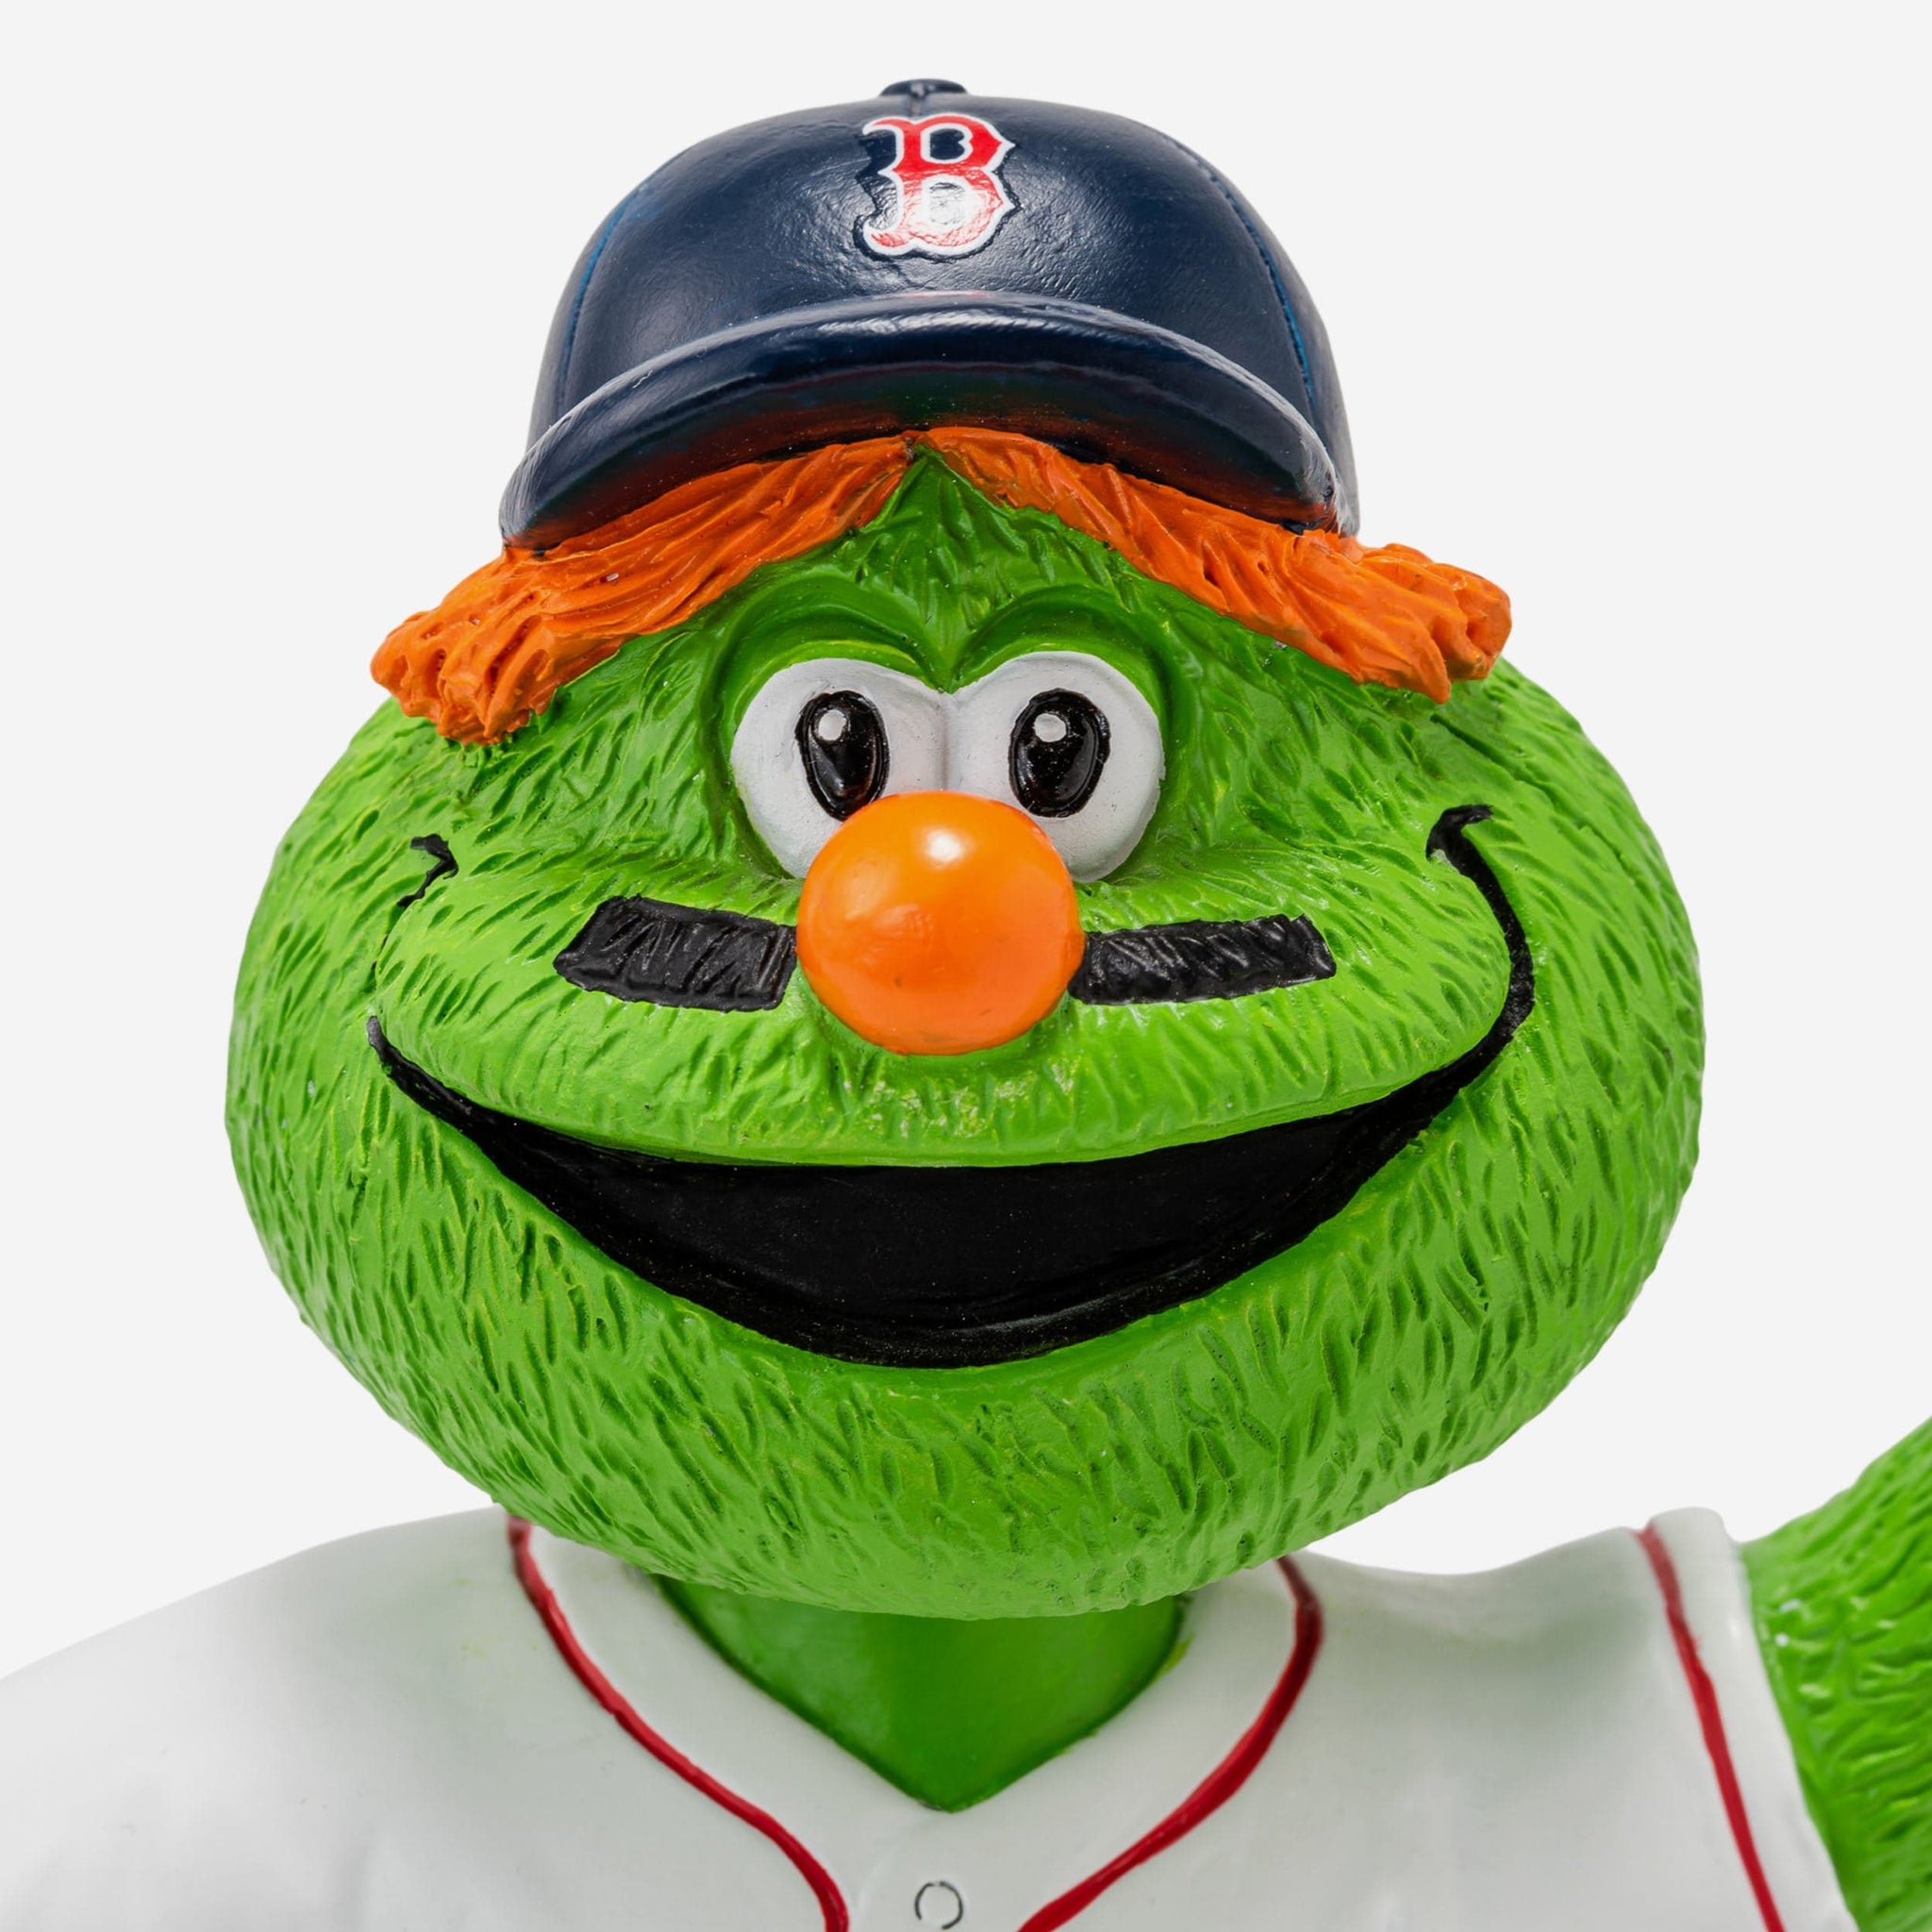 Wally the Green Monster Boston Red Sox Gate Series Mascot